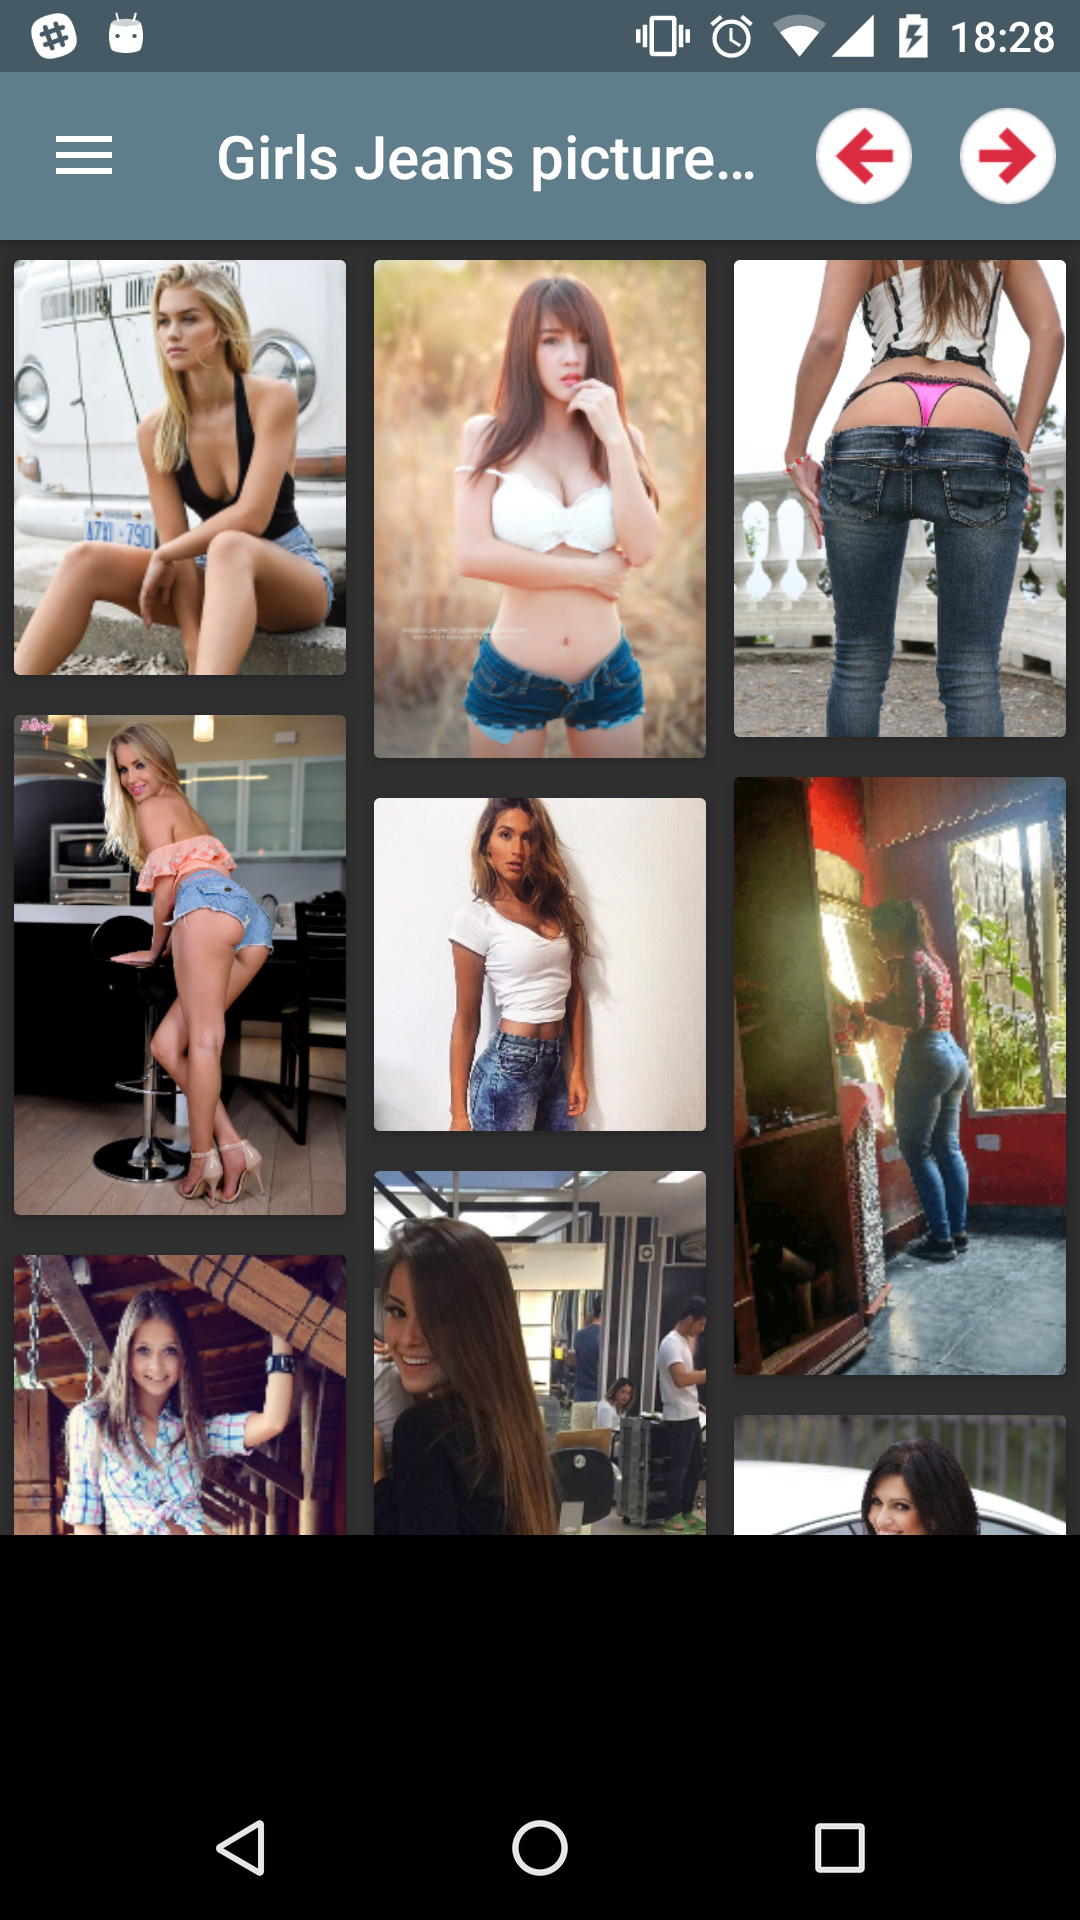 Girls in Jeans photos image,sexy,dresses,heantai,amateur,puzzles,pornstars,asses,appa,apk,mod,jeans,galleries,pic,erotic,hentai,pegging,pics,panties,girls,viewer,photos,porn,hot,pictures,femboy